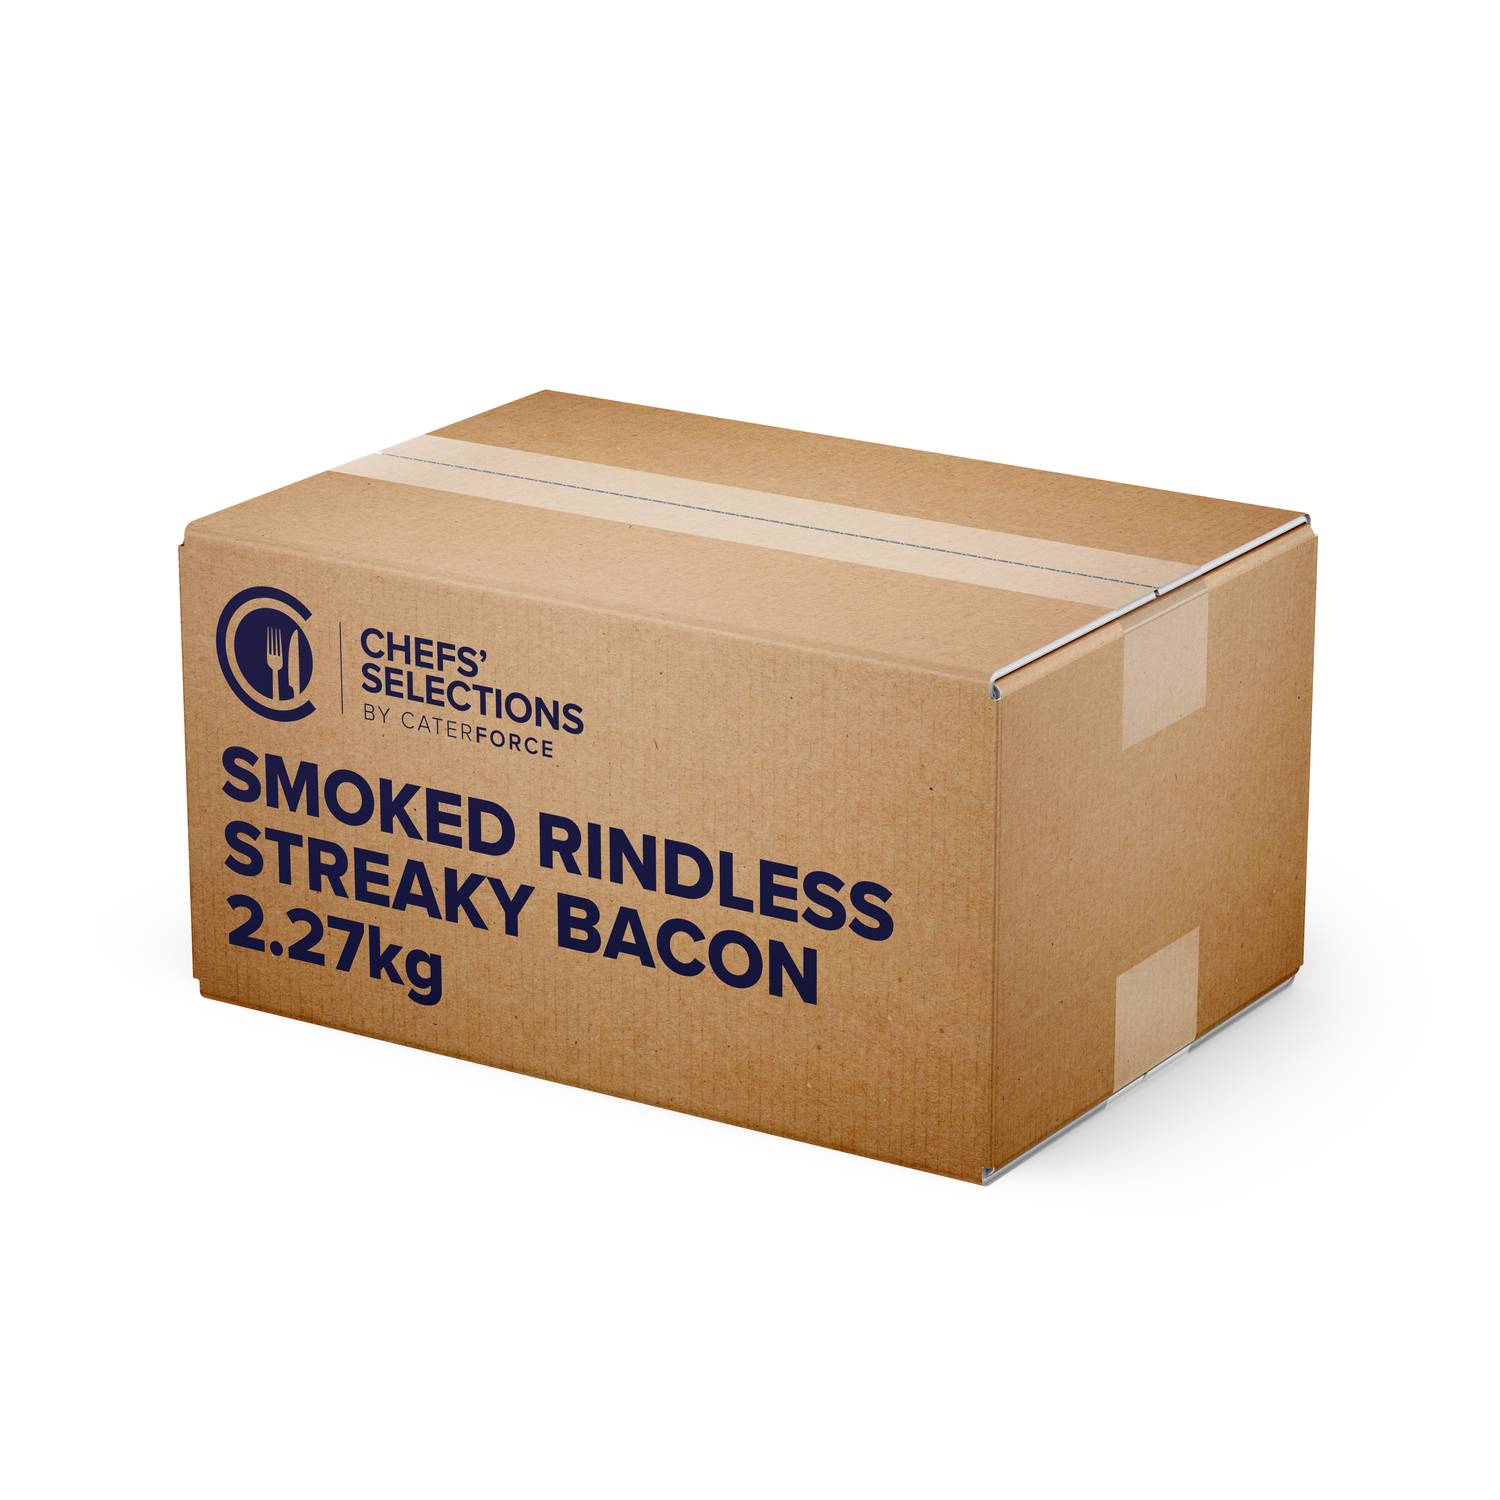 Chefs’ Selections Smoked Rindless Streaky Bacon (4 x 2.27kg)